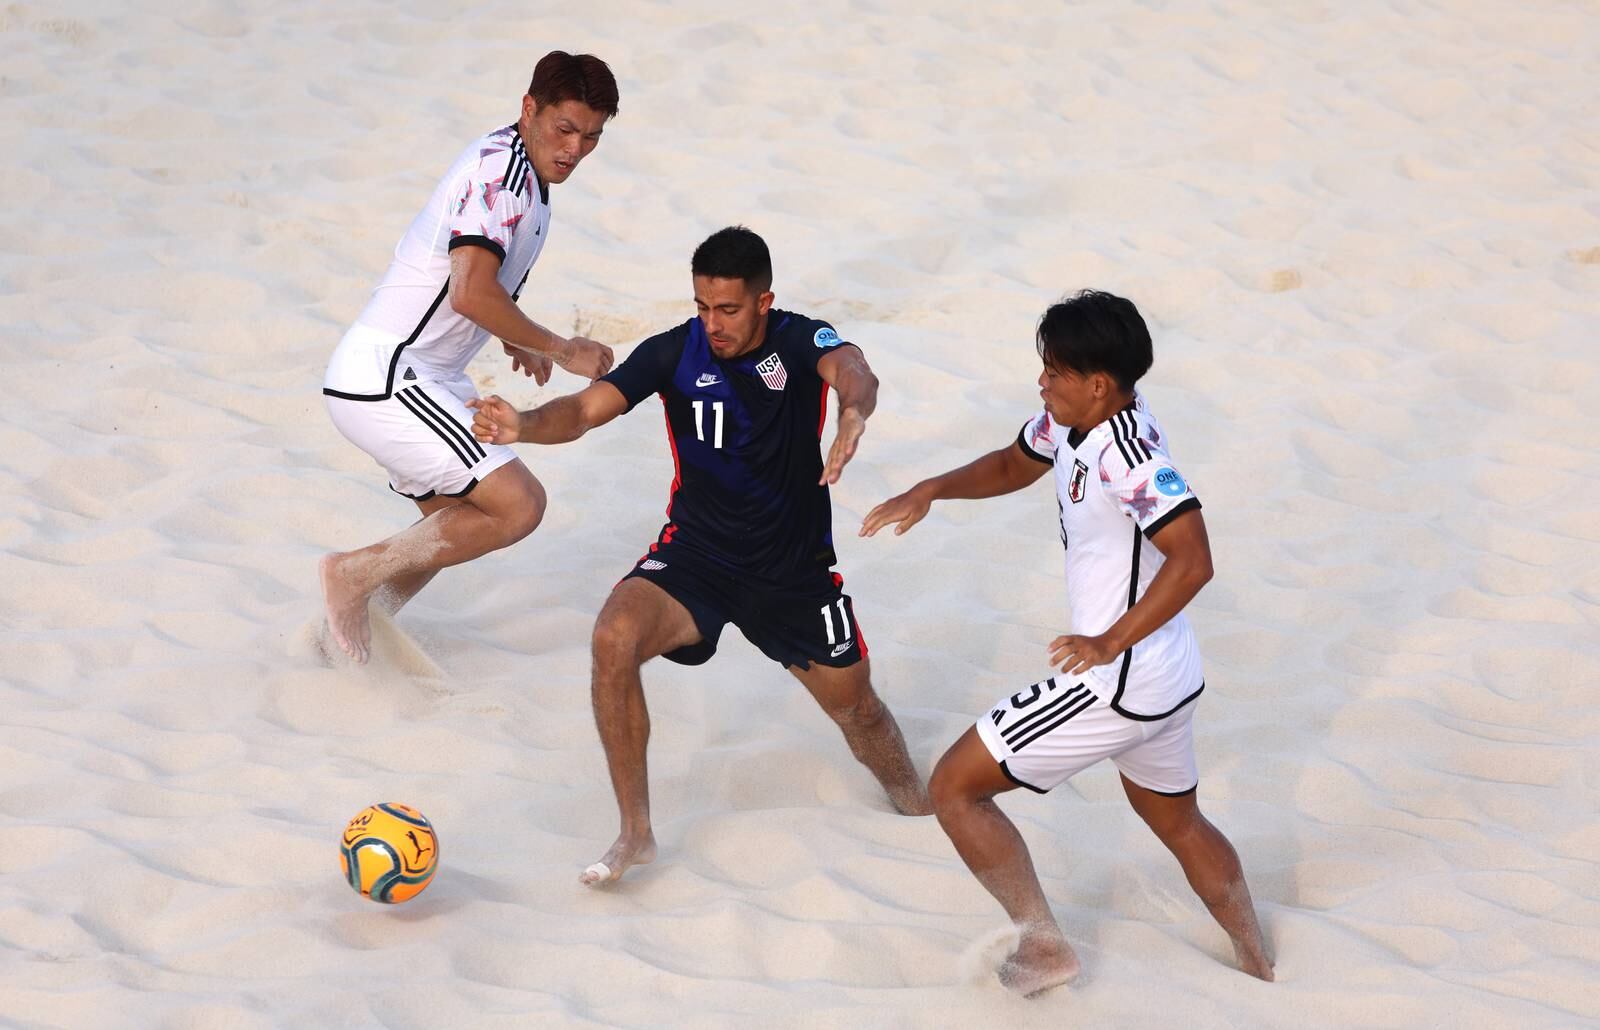 Emirates Intercontinental Beach Soccer Cup In Dubai In Pictures 4618